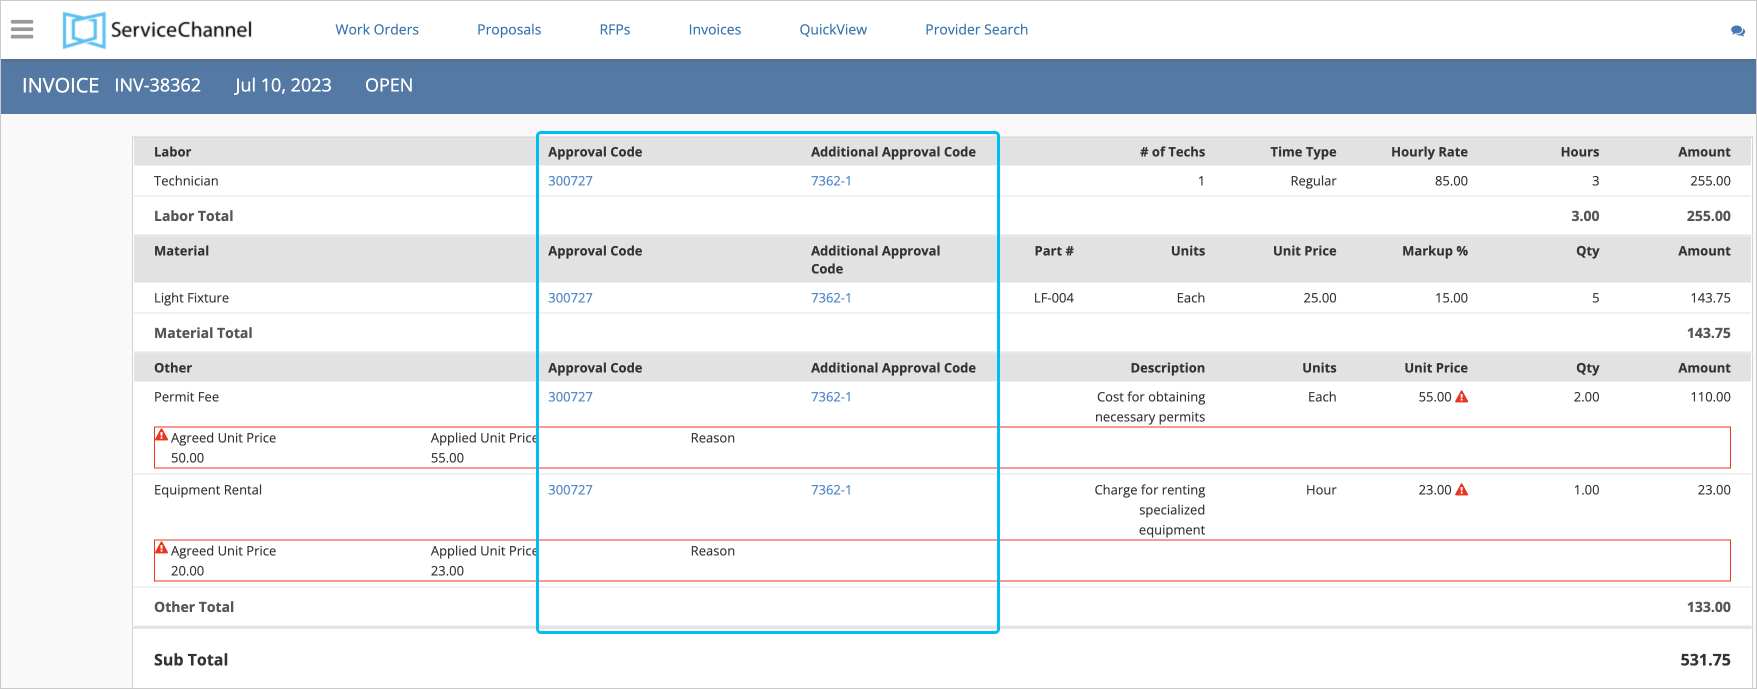 Screenshot showing the GL and additional approval codes